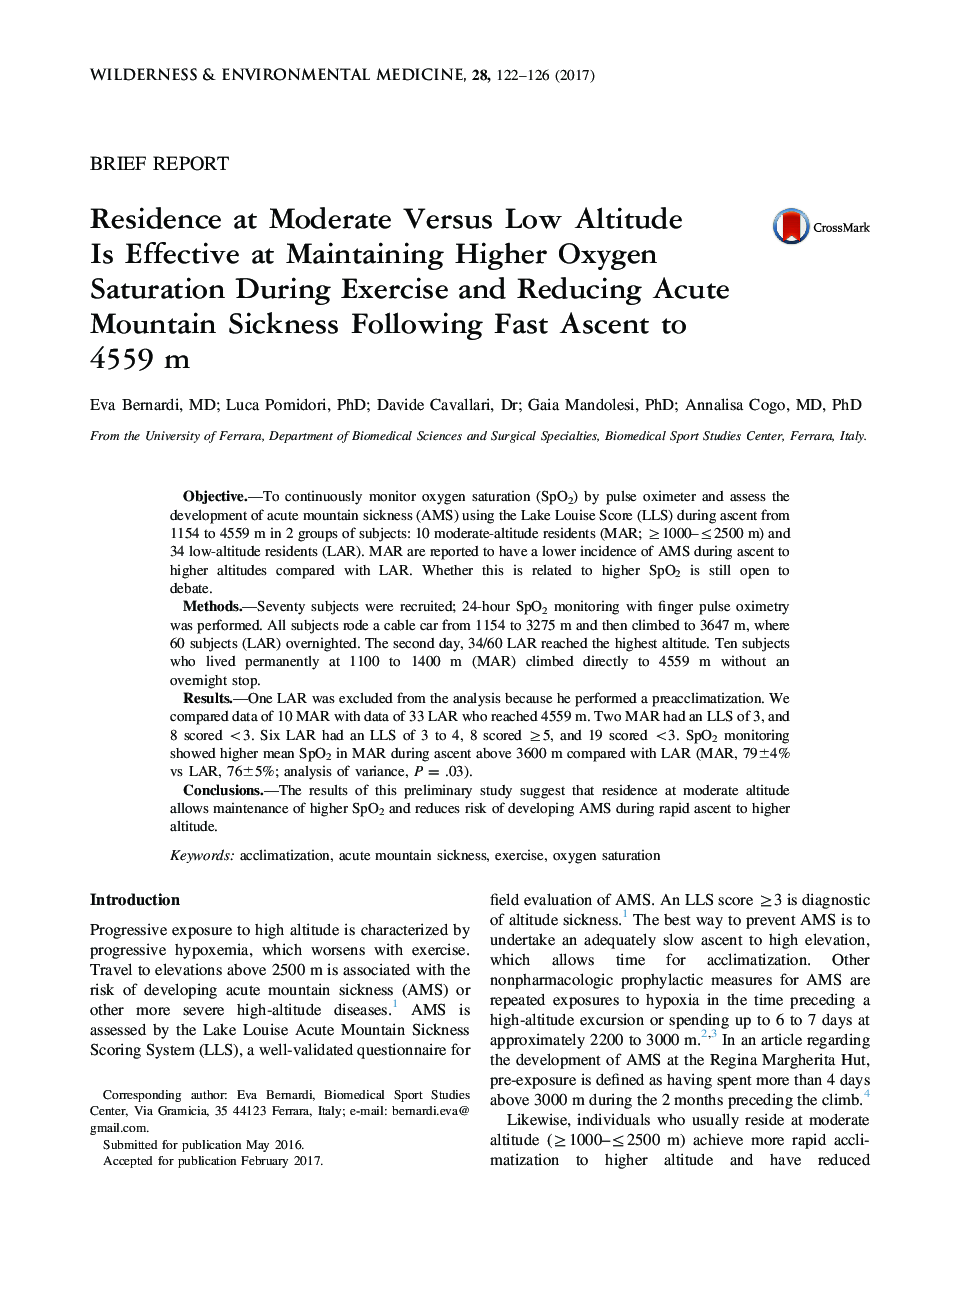 Residence at Moderate Versus Low Altitude Is Effective at Maintaining Higher Oxygen Saturation During Exercise and Reducing Acute Mountain Sickness Following Fast Ascent to 4559 m